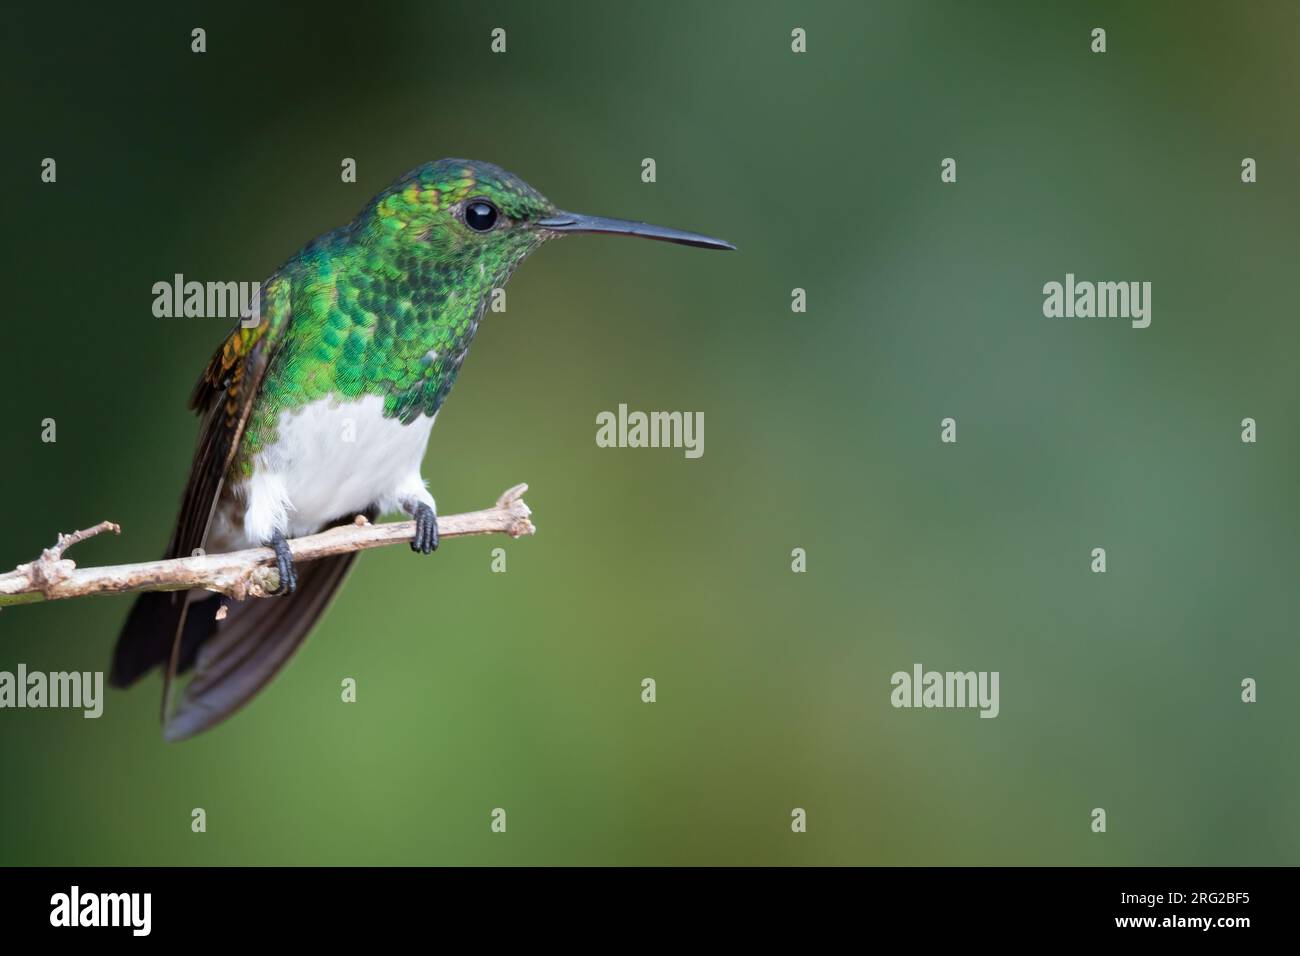 Snowy-bellied Hummingbird (Saucerottia edward) perched on a branch in a rainforest in Panama. Stock Photo